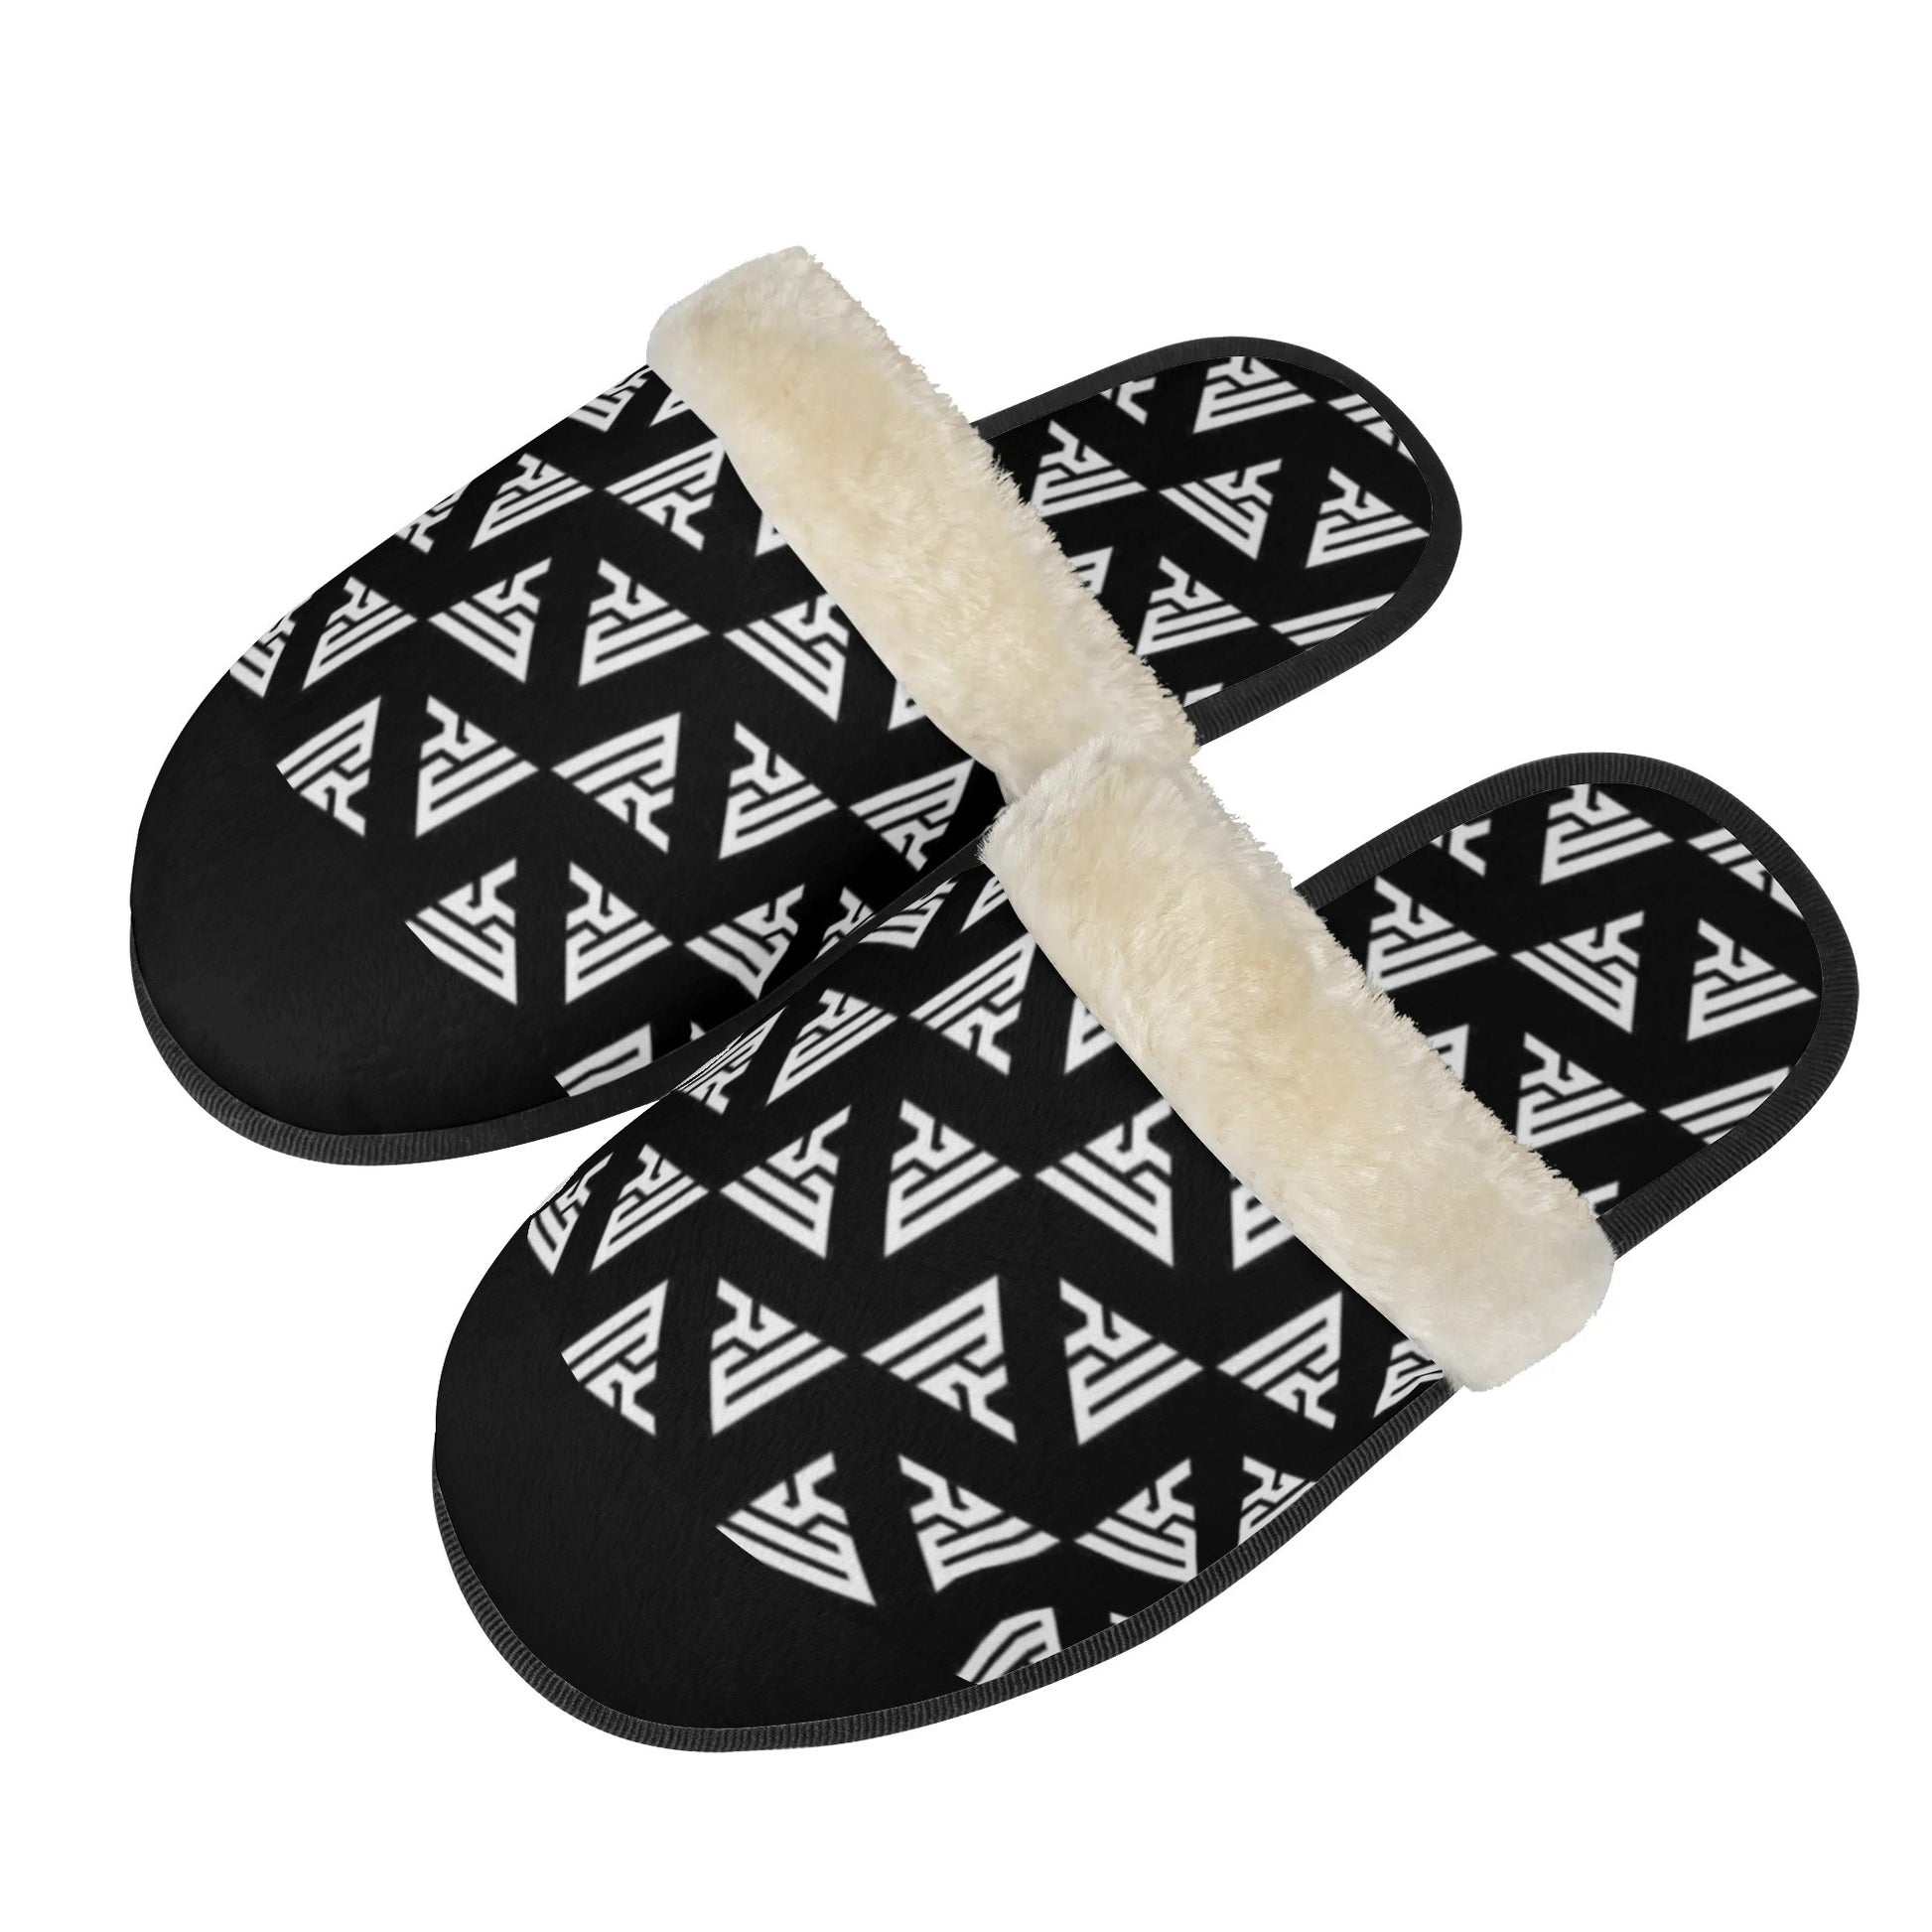 Rongoworks Unisex Non Slip EVA Warm Slippers Rongoworks